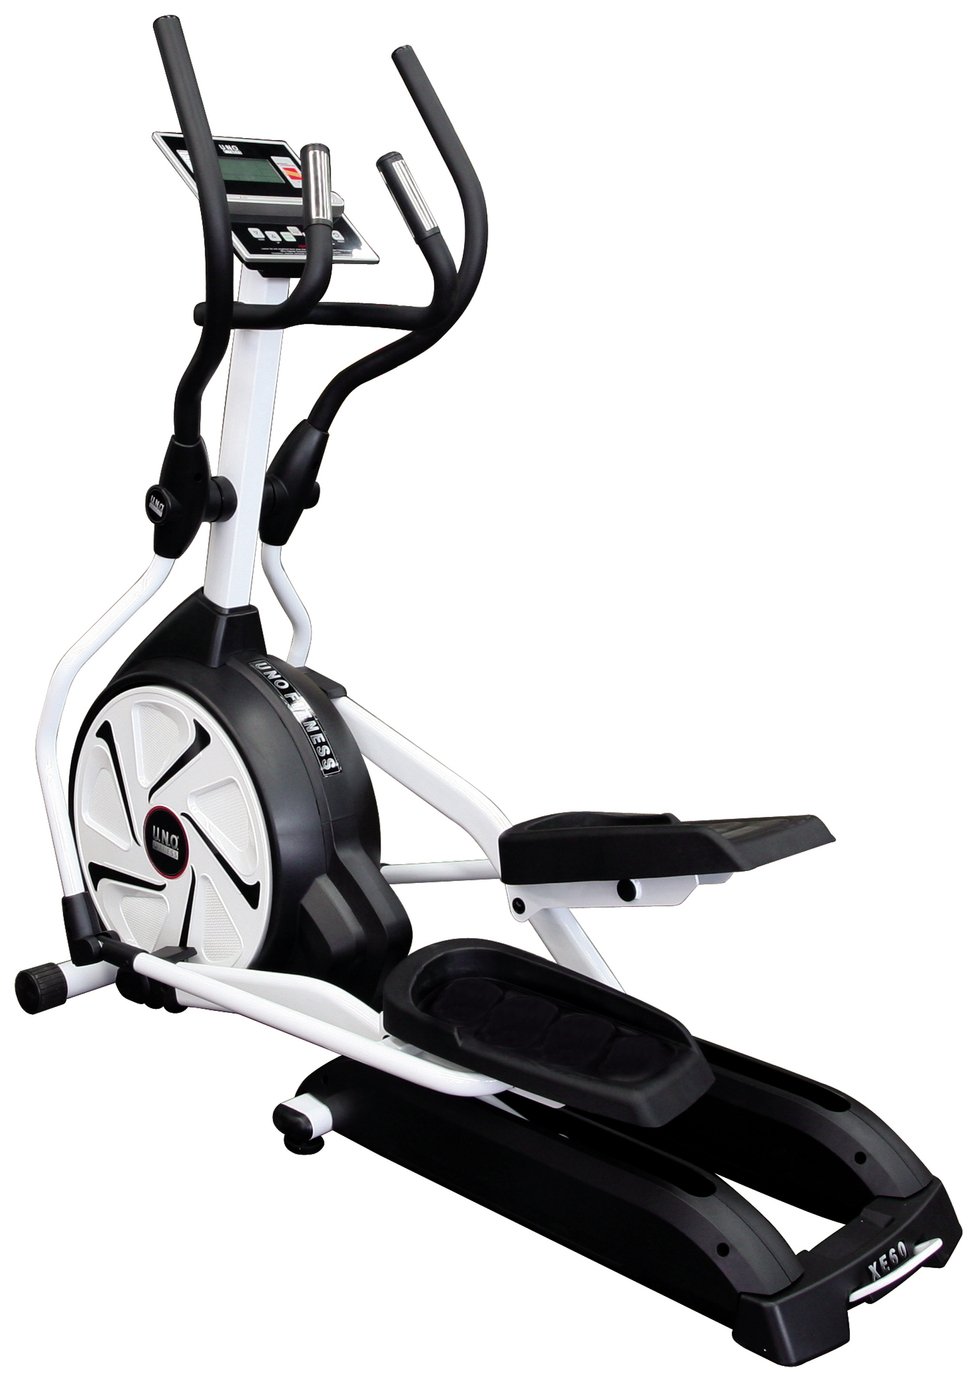 UNO Fitness XE60 Programmable Electro Magnetic Cross Trainer